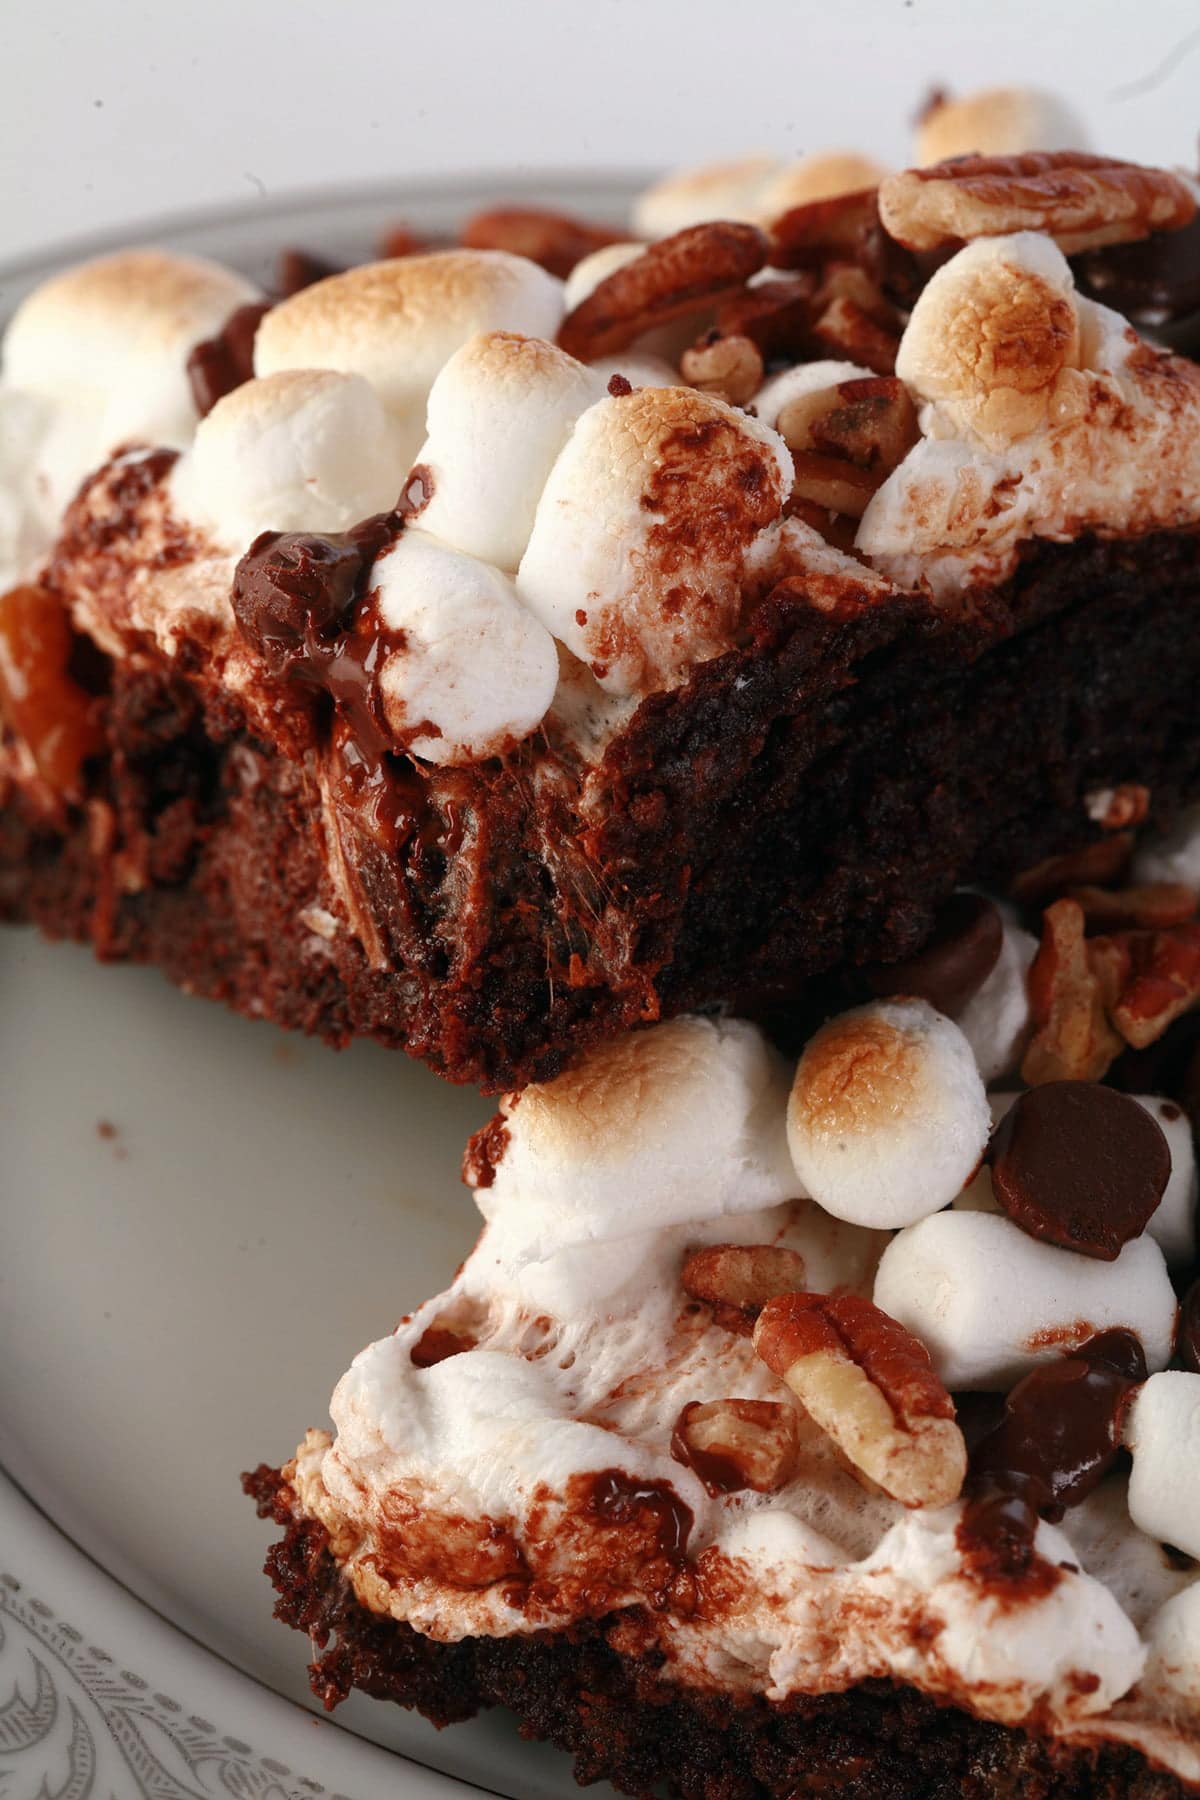 A close up view of two rocky road brownies - double chocolate walnut brownies with toasted mini marshmallows, chocolate chips, and chopped pecans on top.